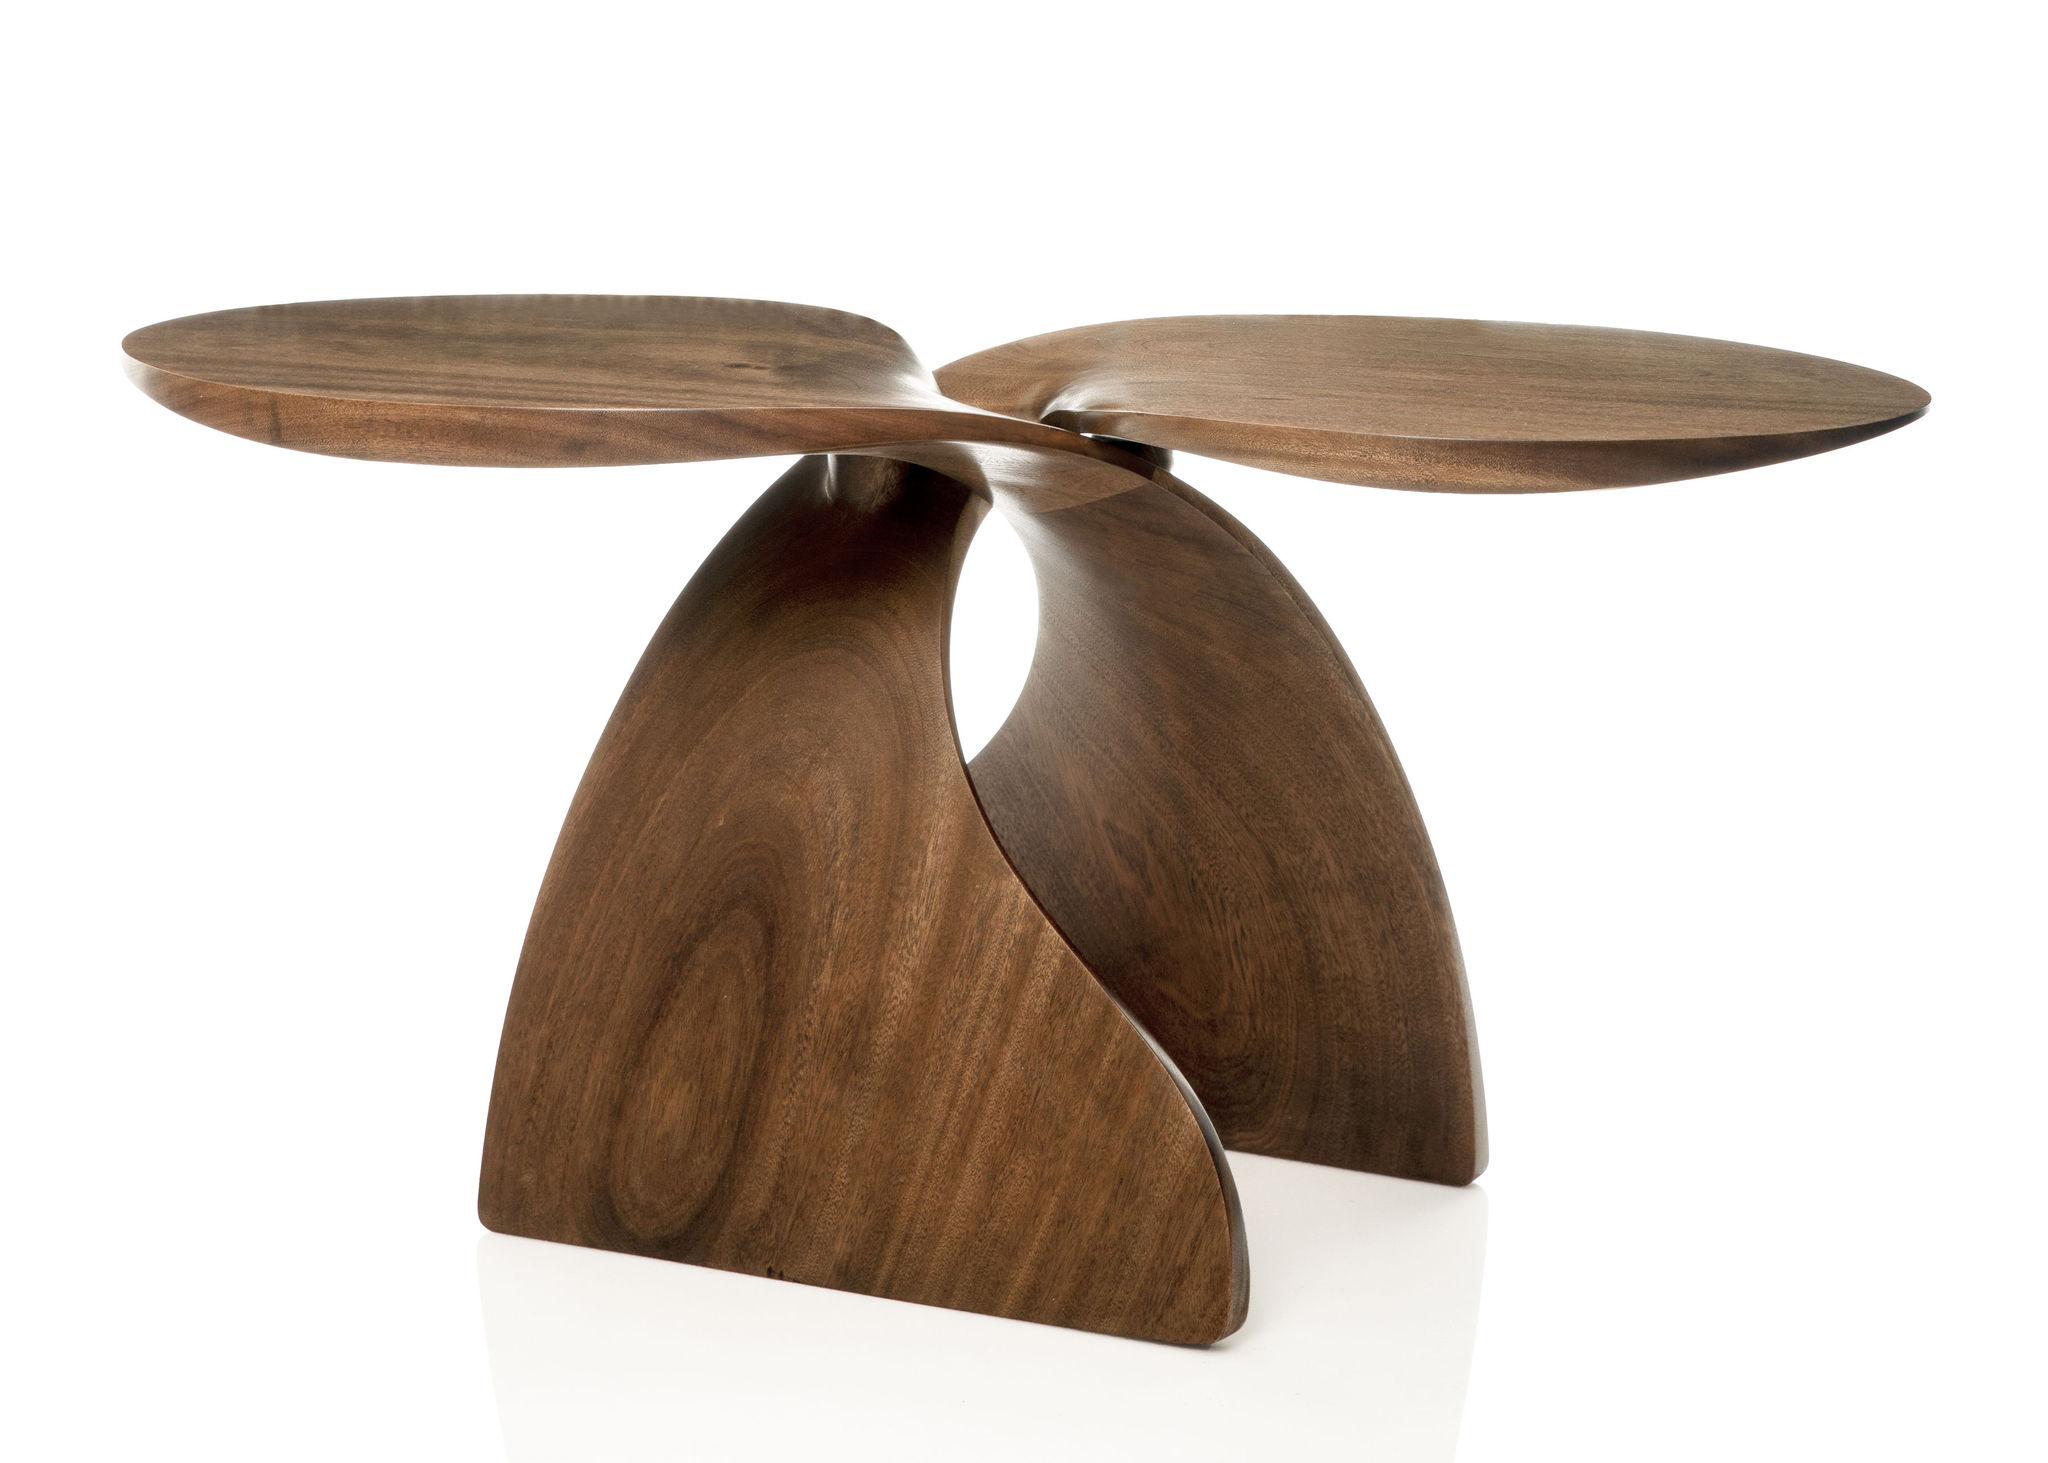 This contemporary table combines the clearly organic shape of the hand carved sweeping base elements, with the contemporary, geometric shape of the tops. Made up of two of identical sapele wood carvings, it has a playful rhythm like a pair of fish,